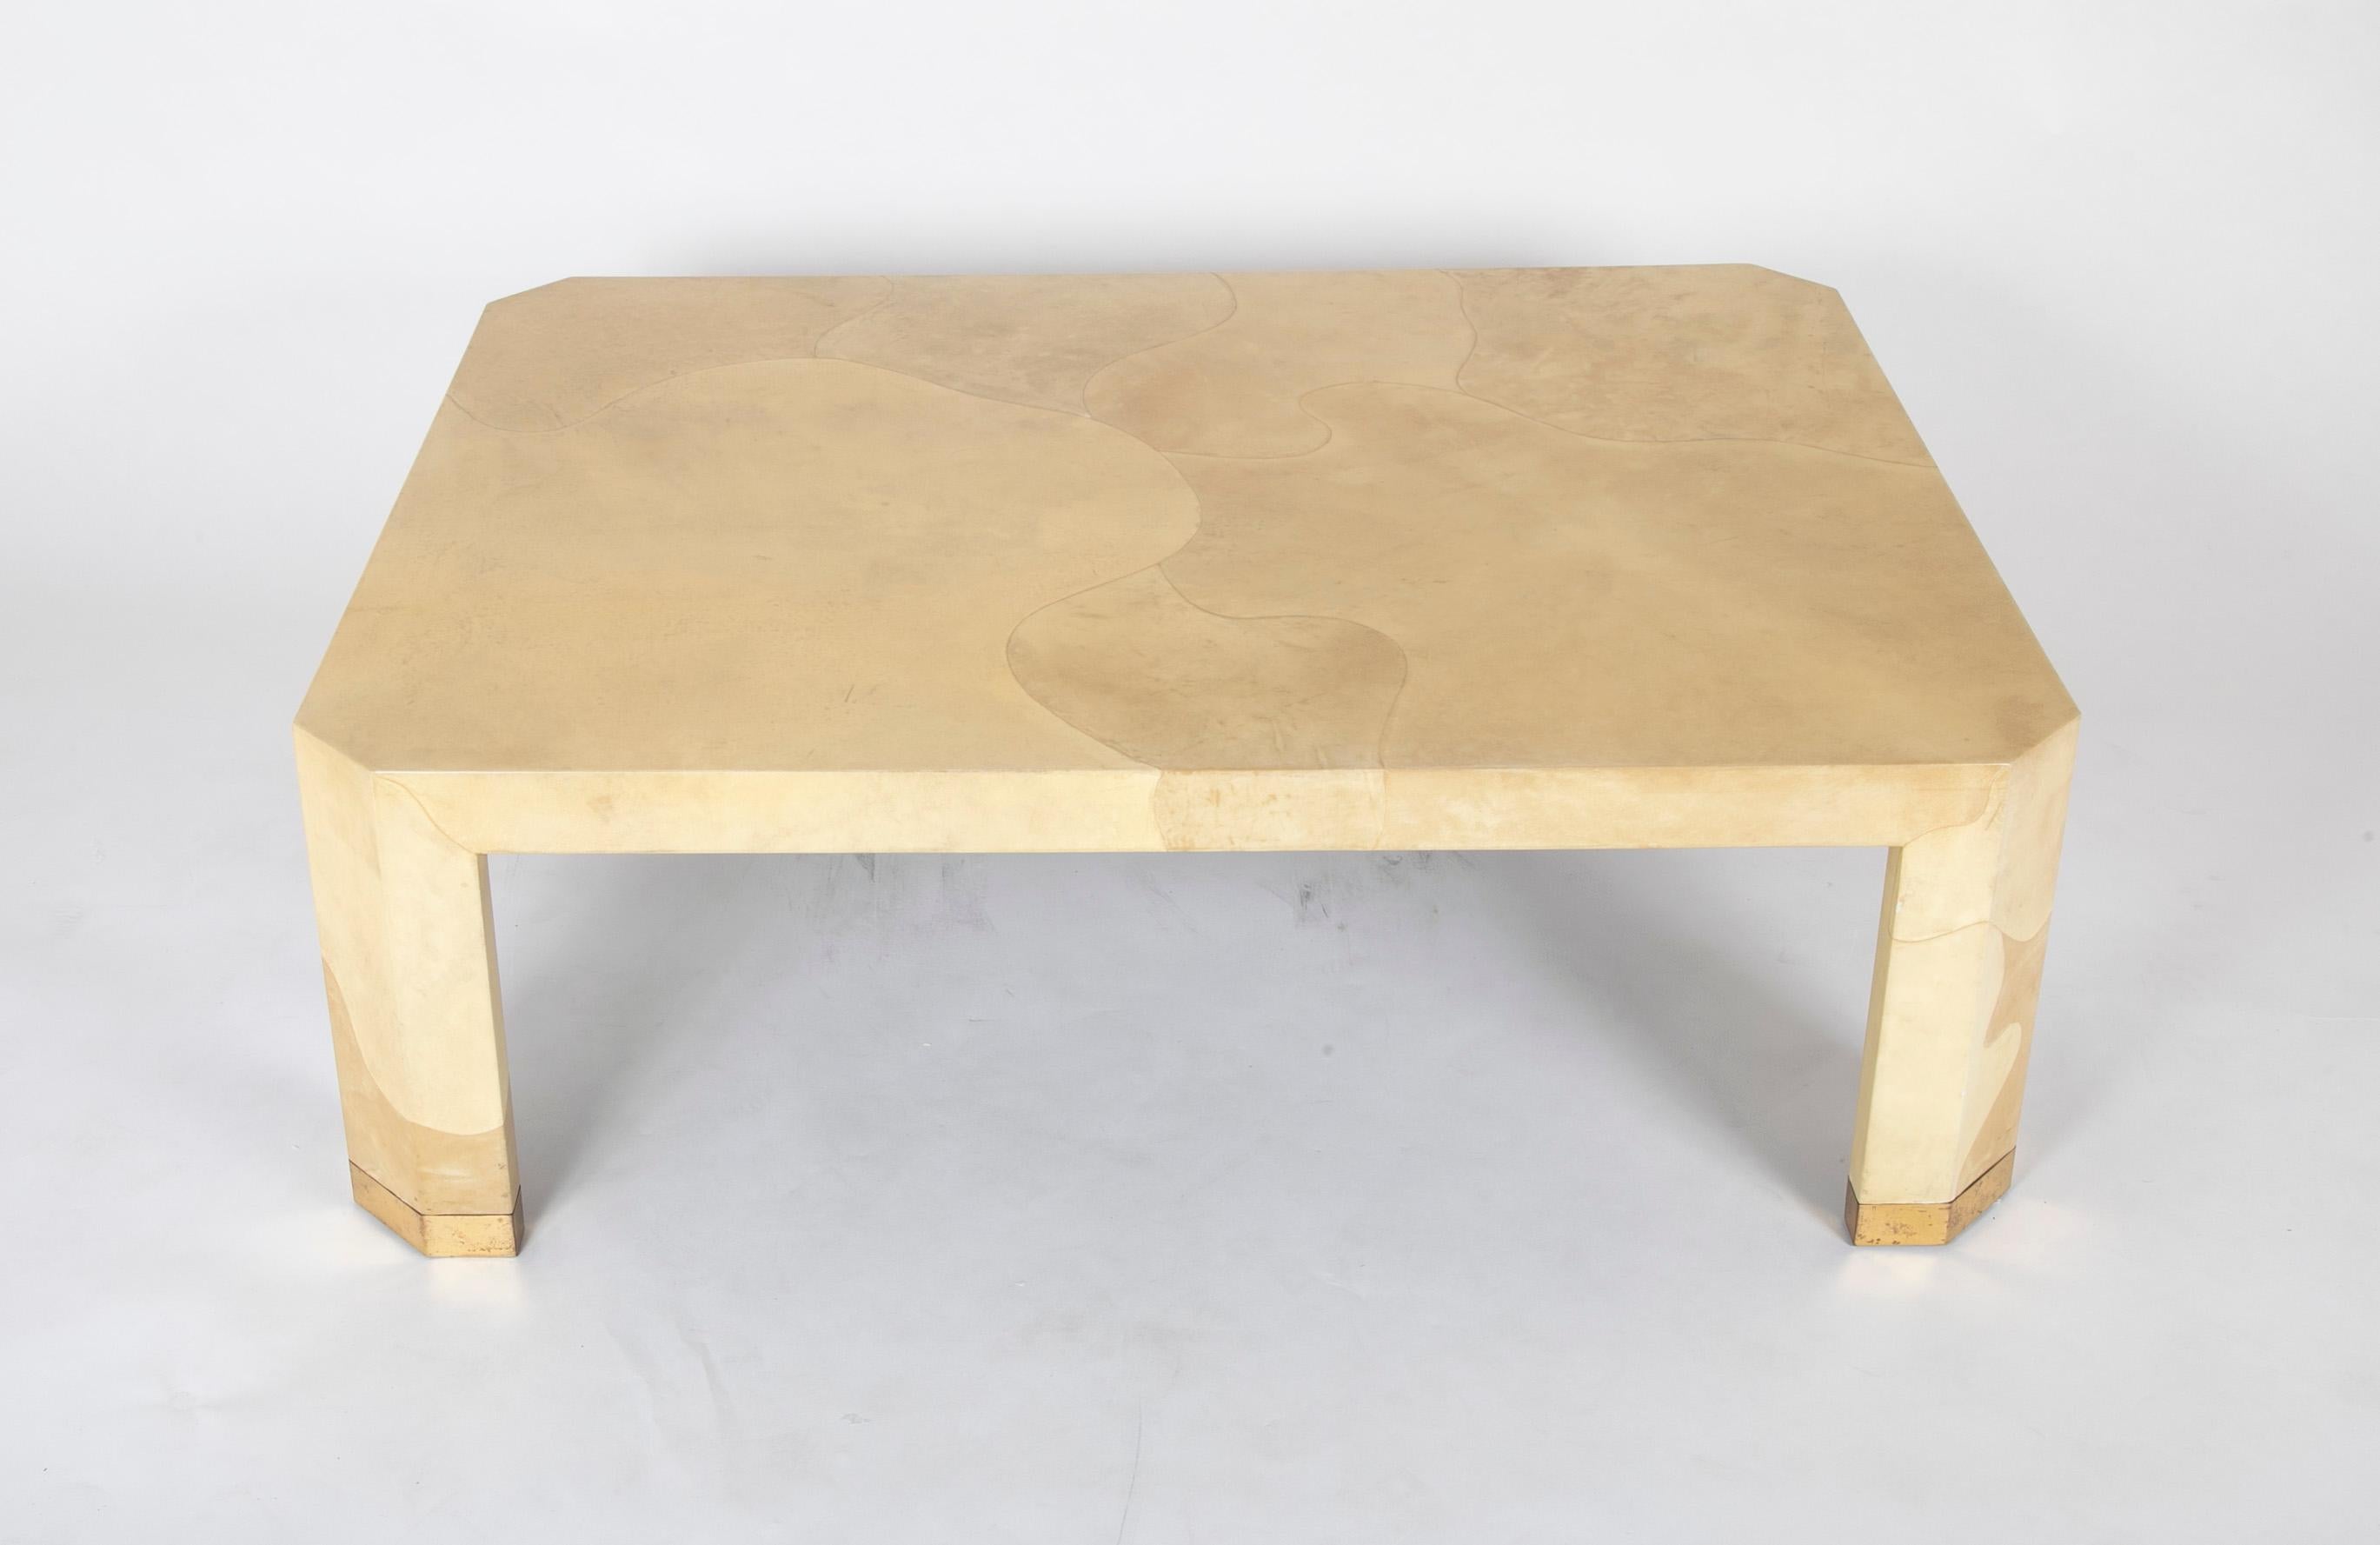 This coffee table featuring cream colored lacquered goat skin with brass sabot feet displays Seff’s masterful application of exotic natural materials to his graceful designs. The piece is crafted with uncompromising attention to detail, marked by